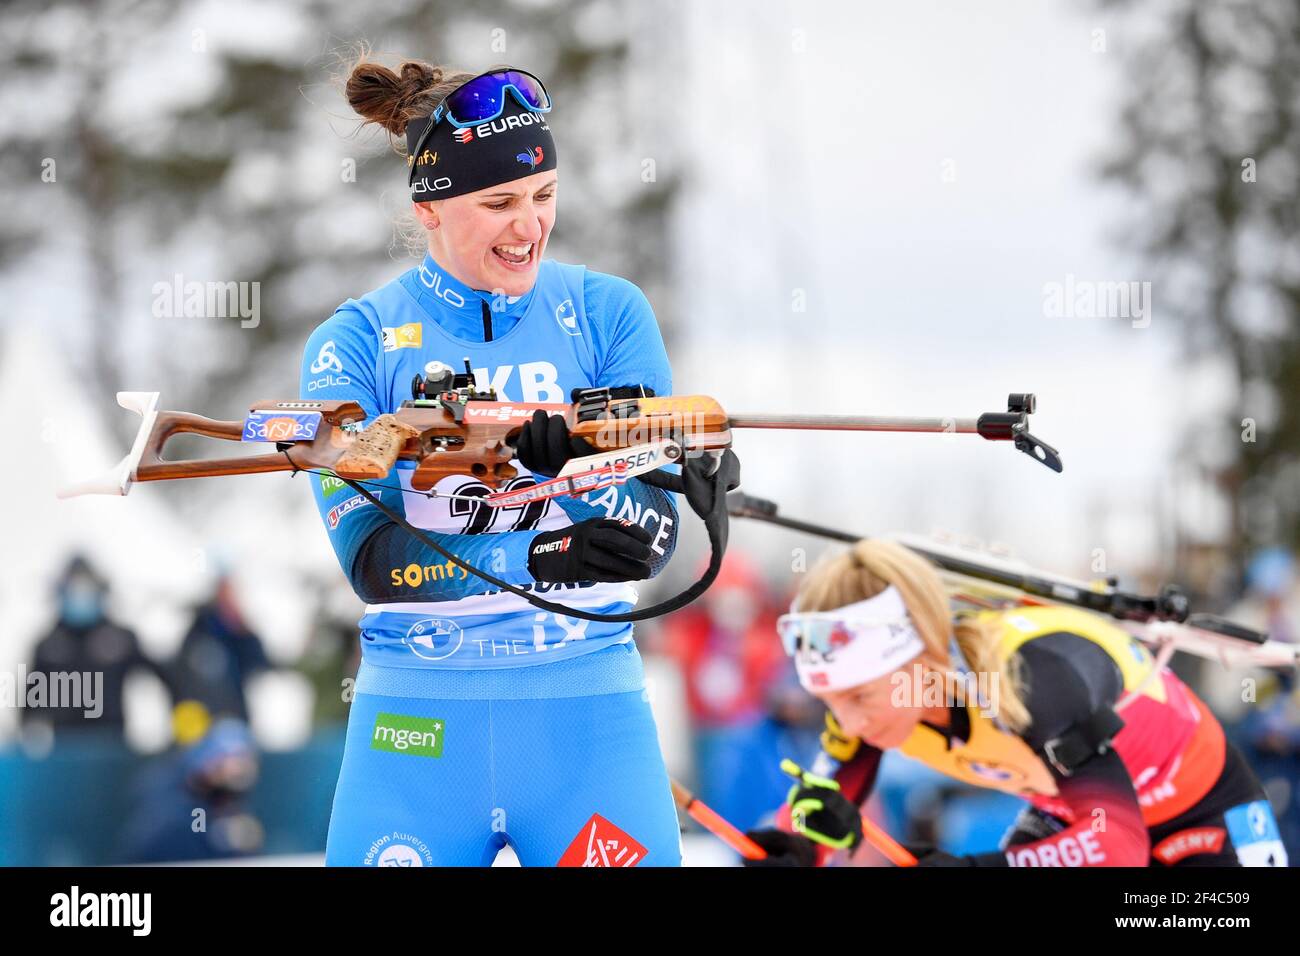 Julia Simon of France in action during the Womens 10km Pursuit Competition during the IBU World